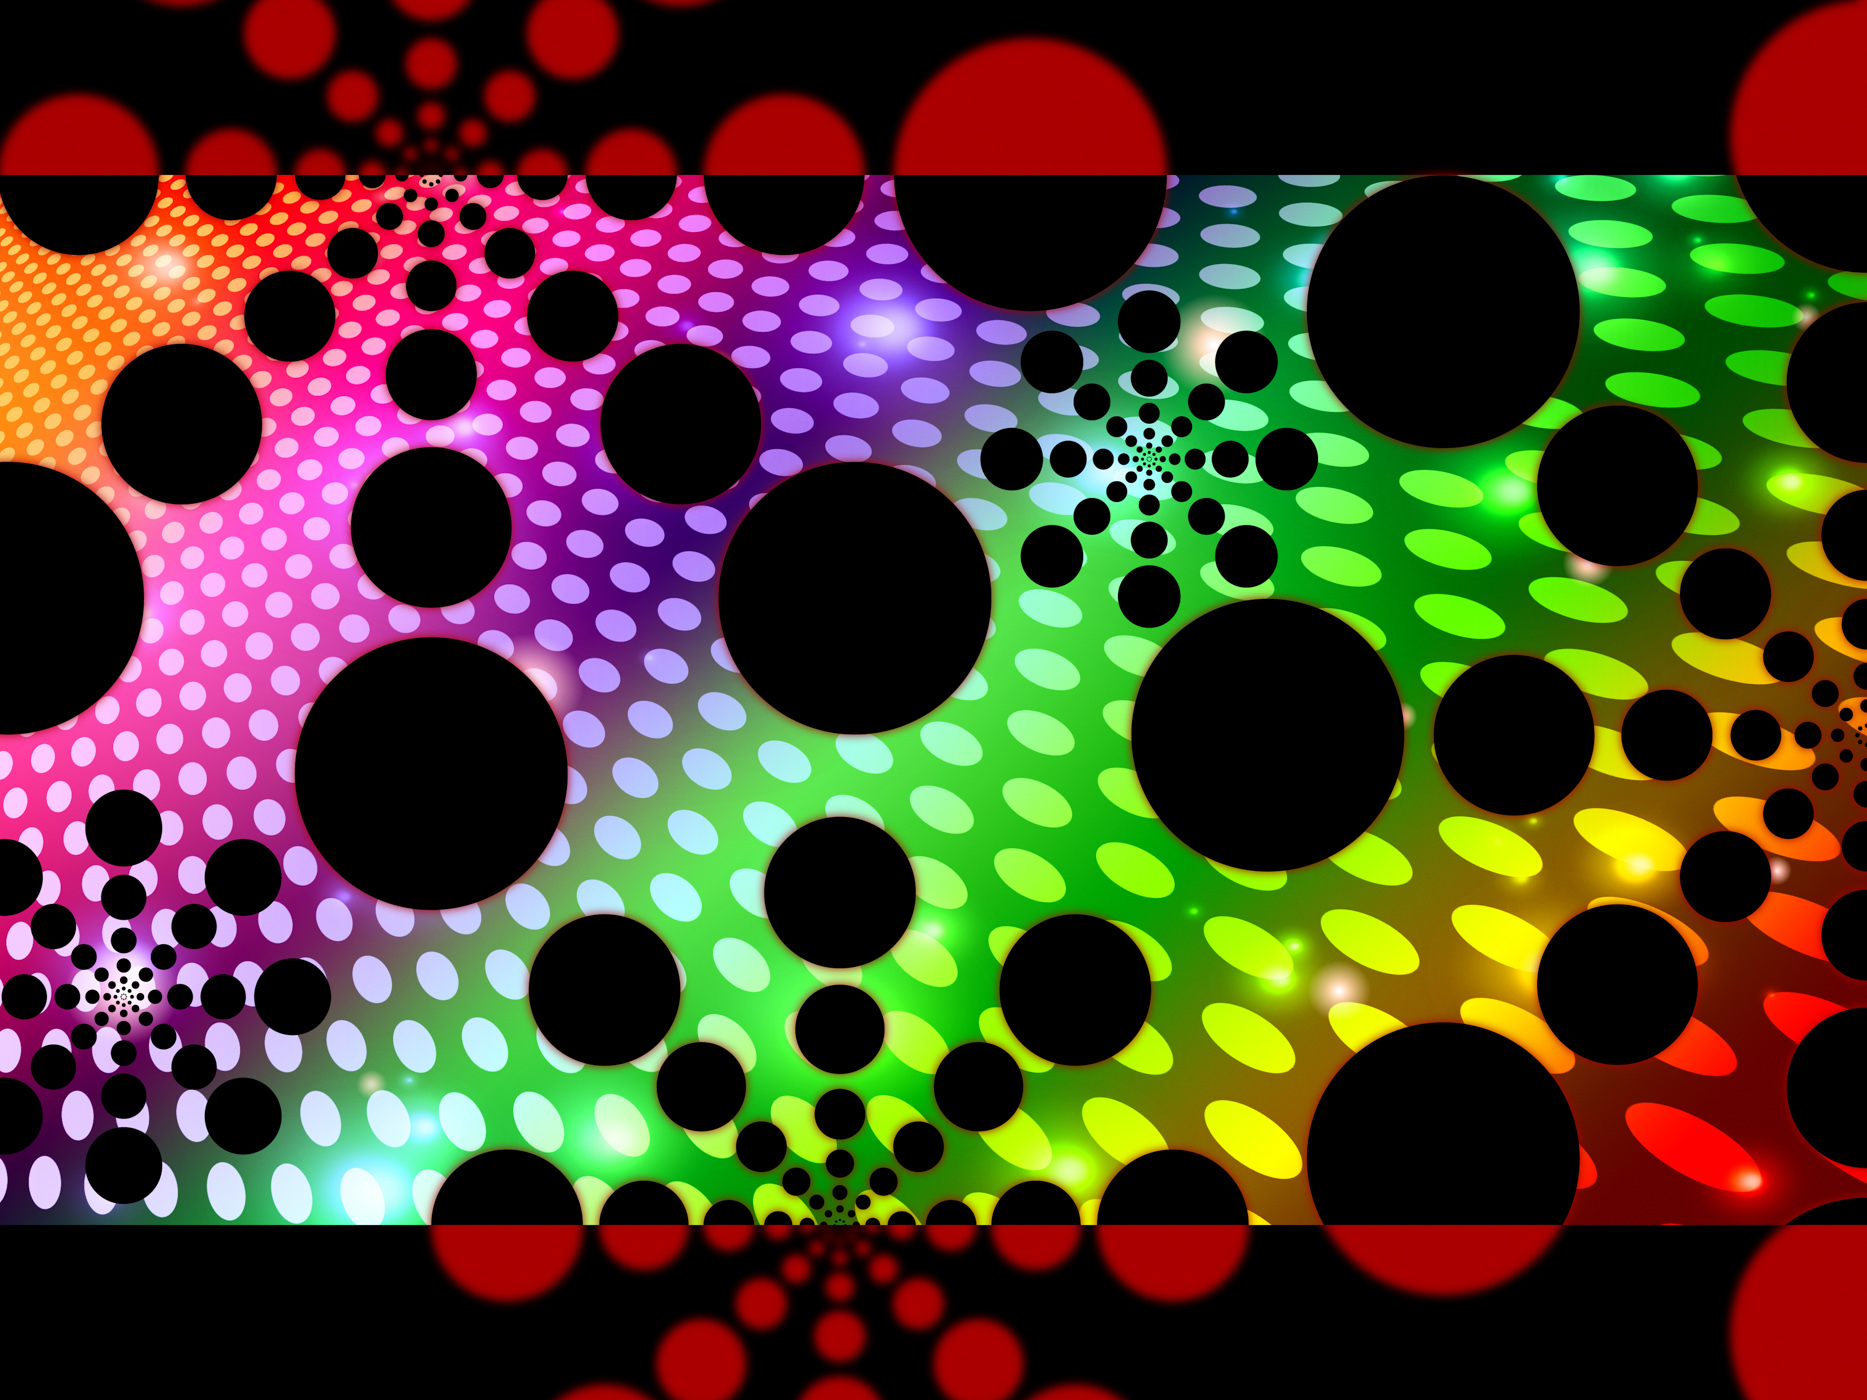 Dots background means decorative round spots and patterns photo